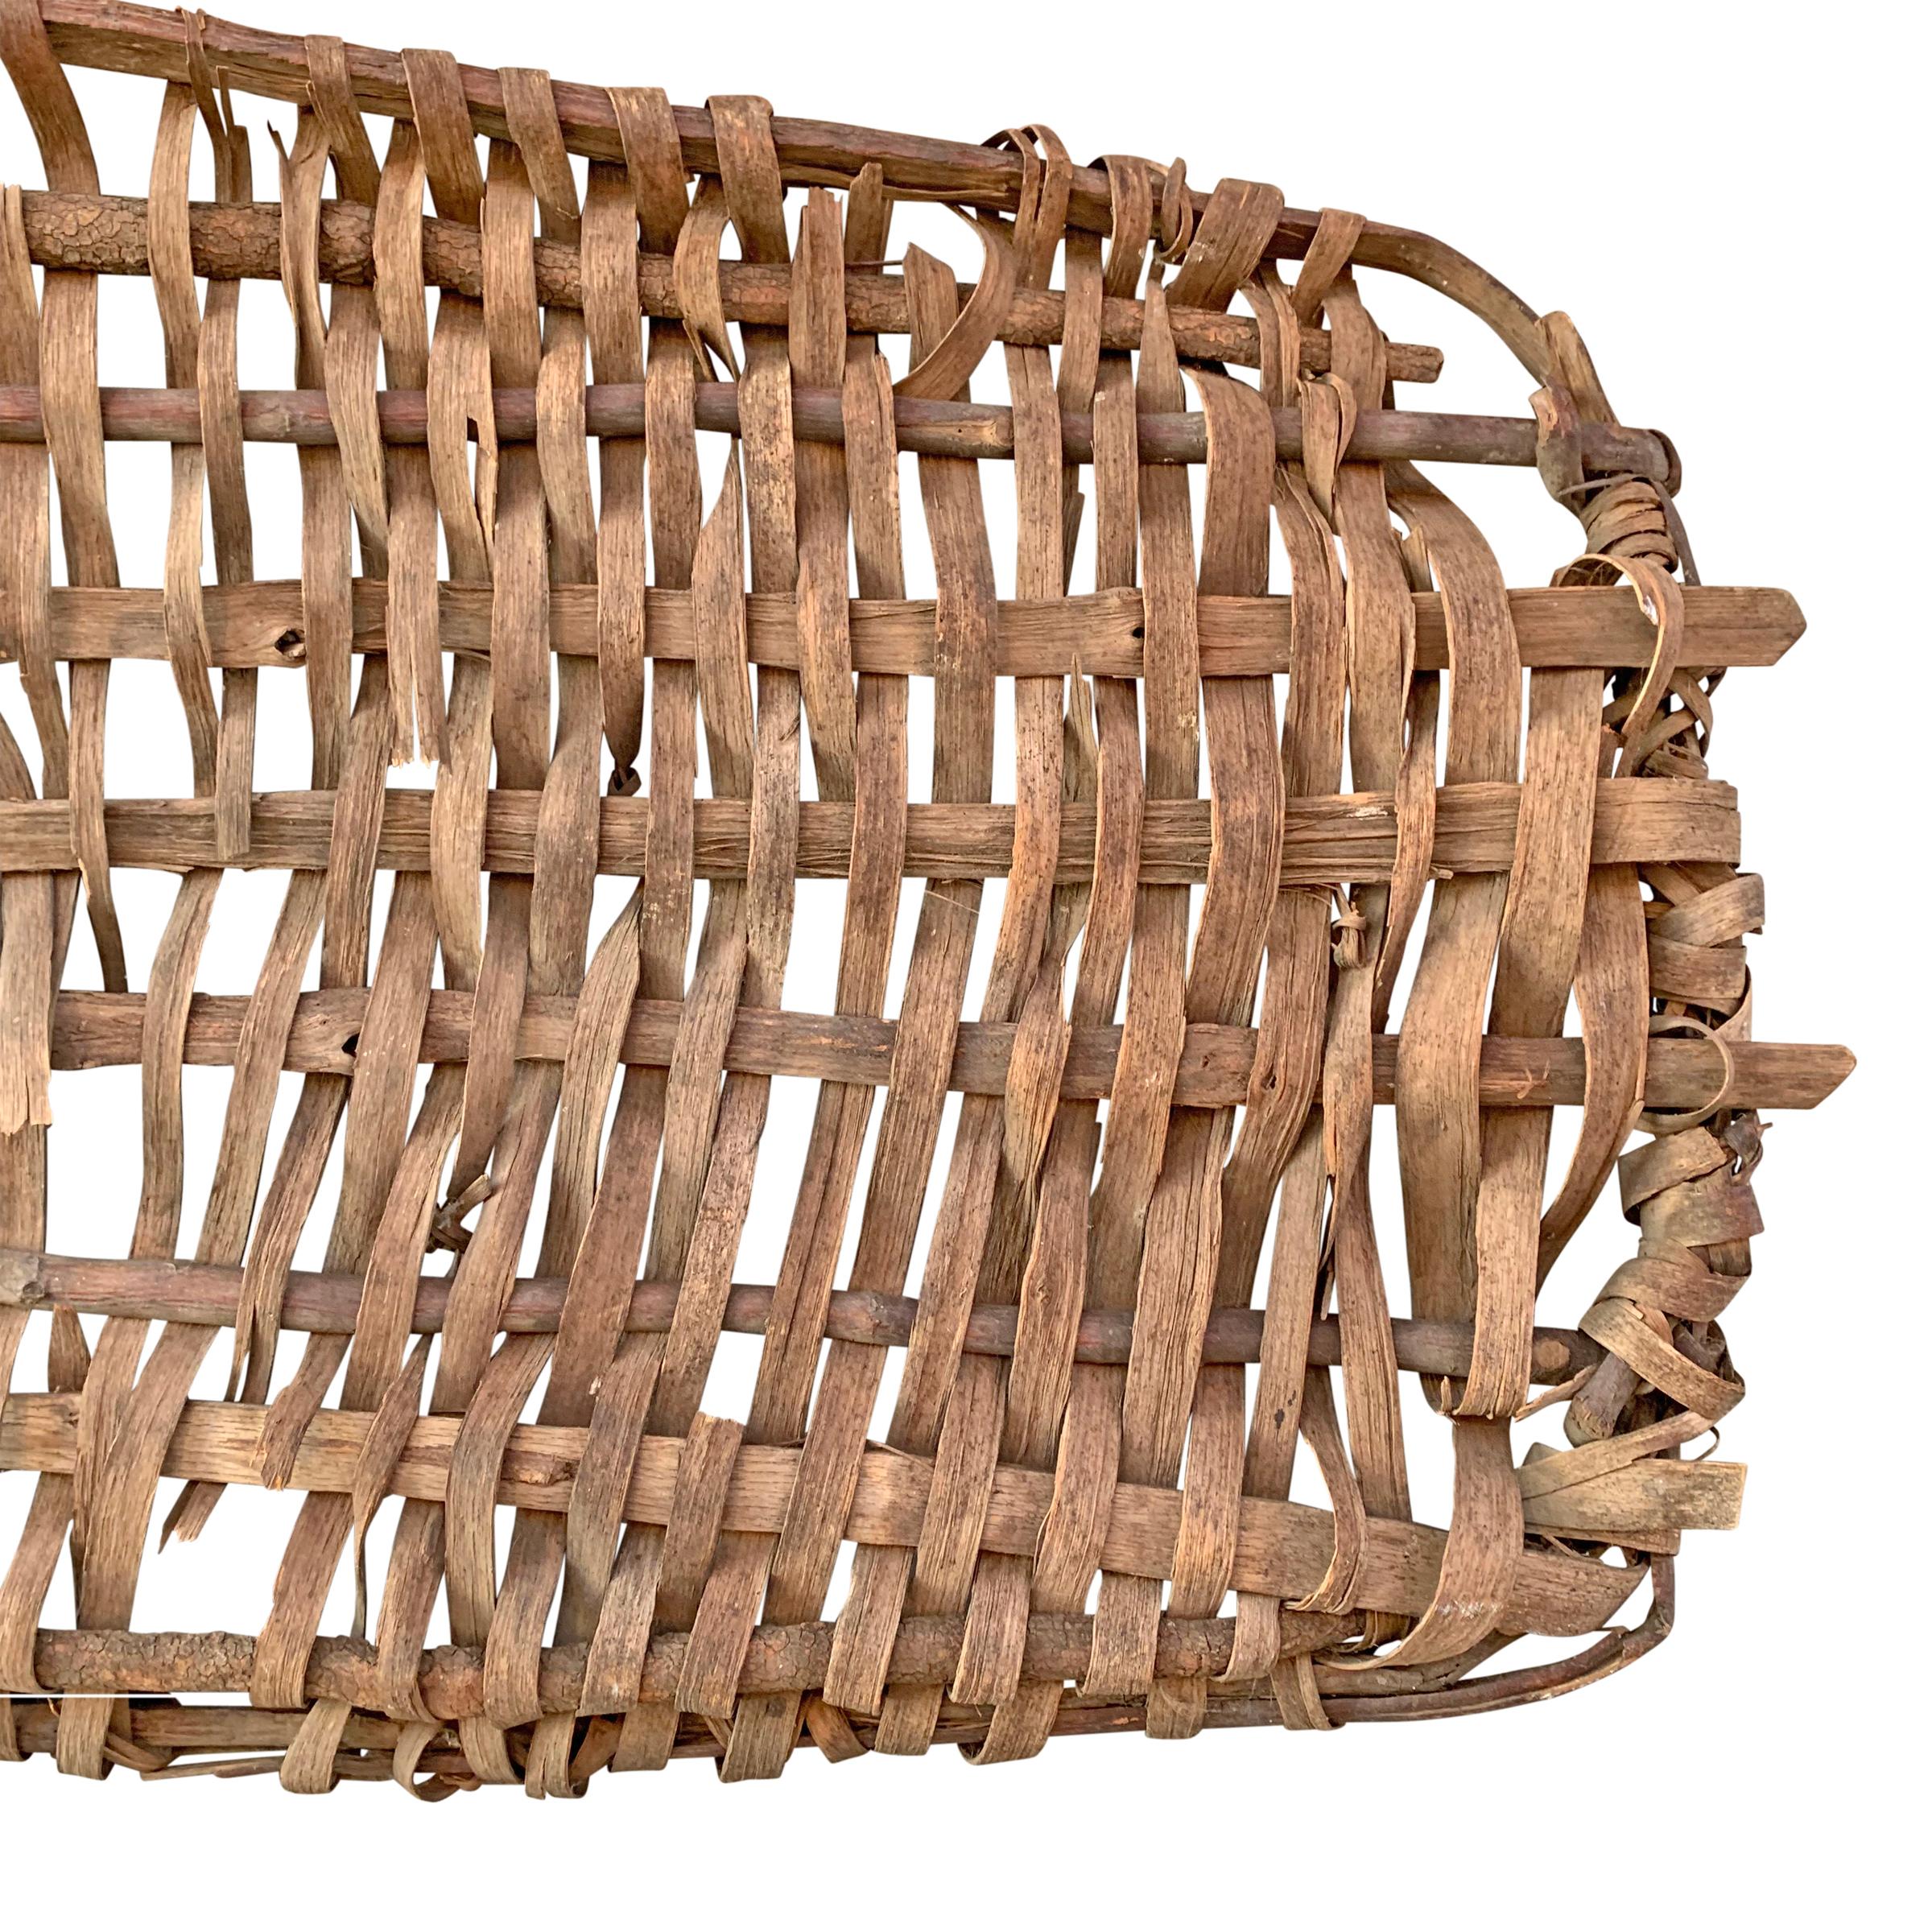 A wonderfully sculptural 19th century American drying basket probably used to dry herbs, leaves, fish, or other meats, constructed with a thick bent oak frame and thinner oak splints. Perfect as a wall hanging; can be hung horizontally or vertically.